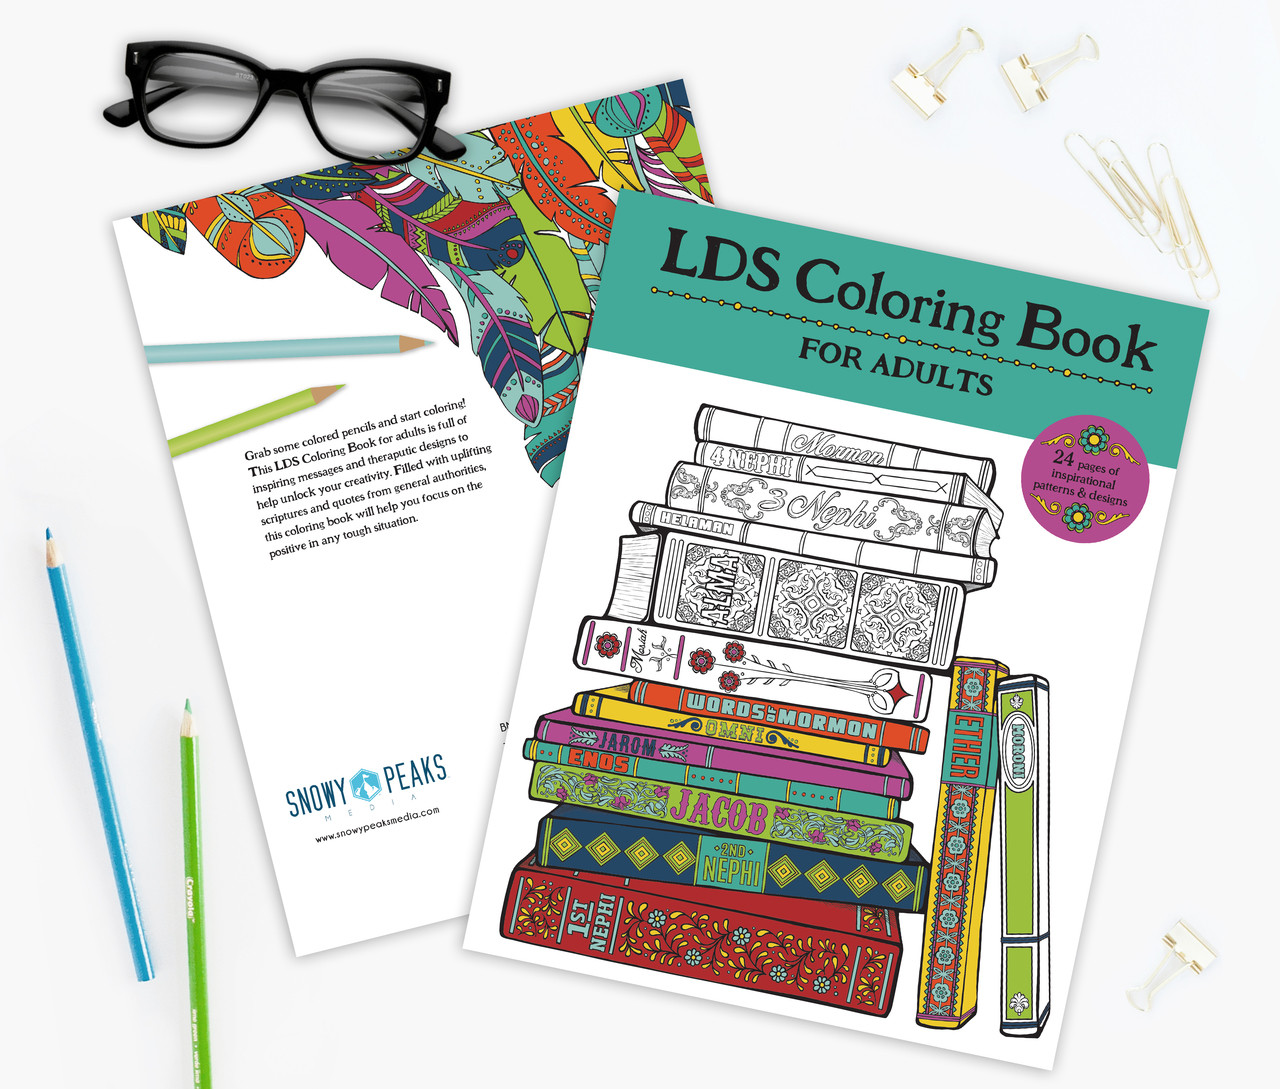 Lds coloring book for adults